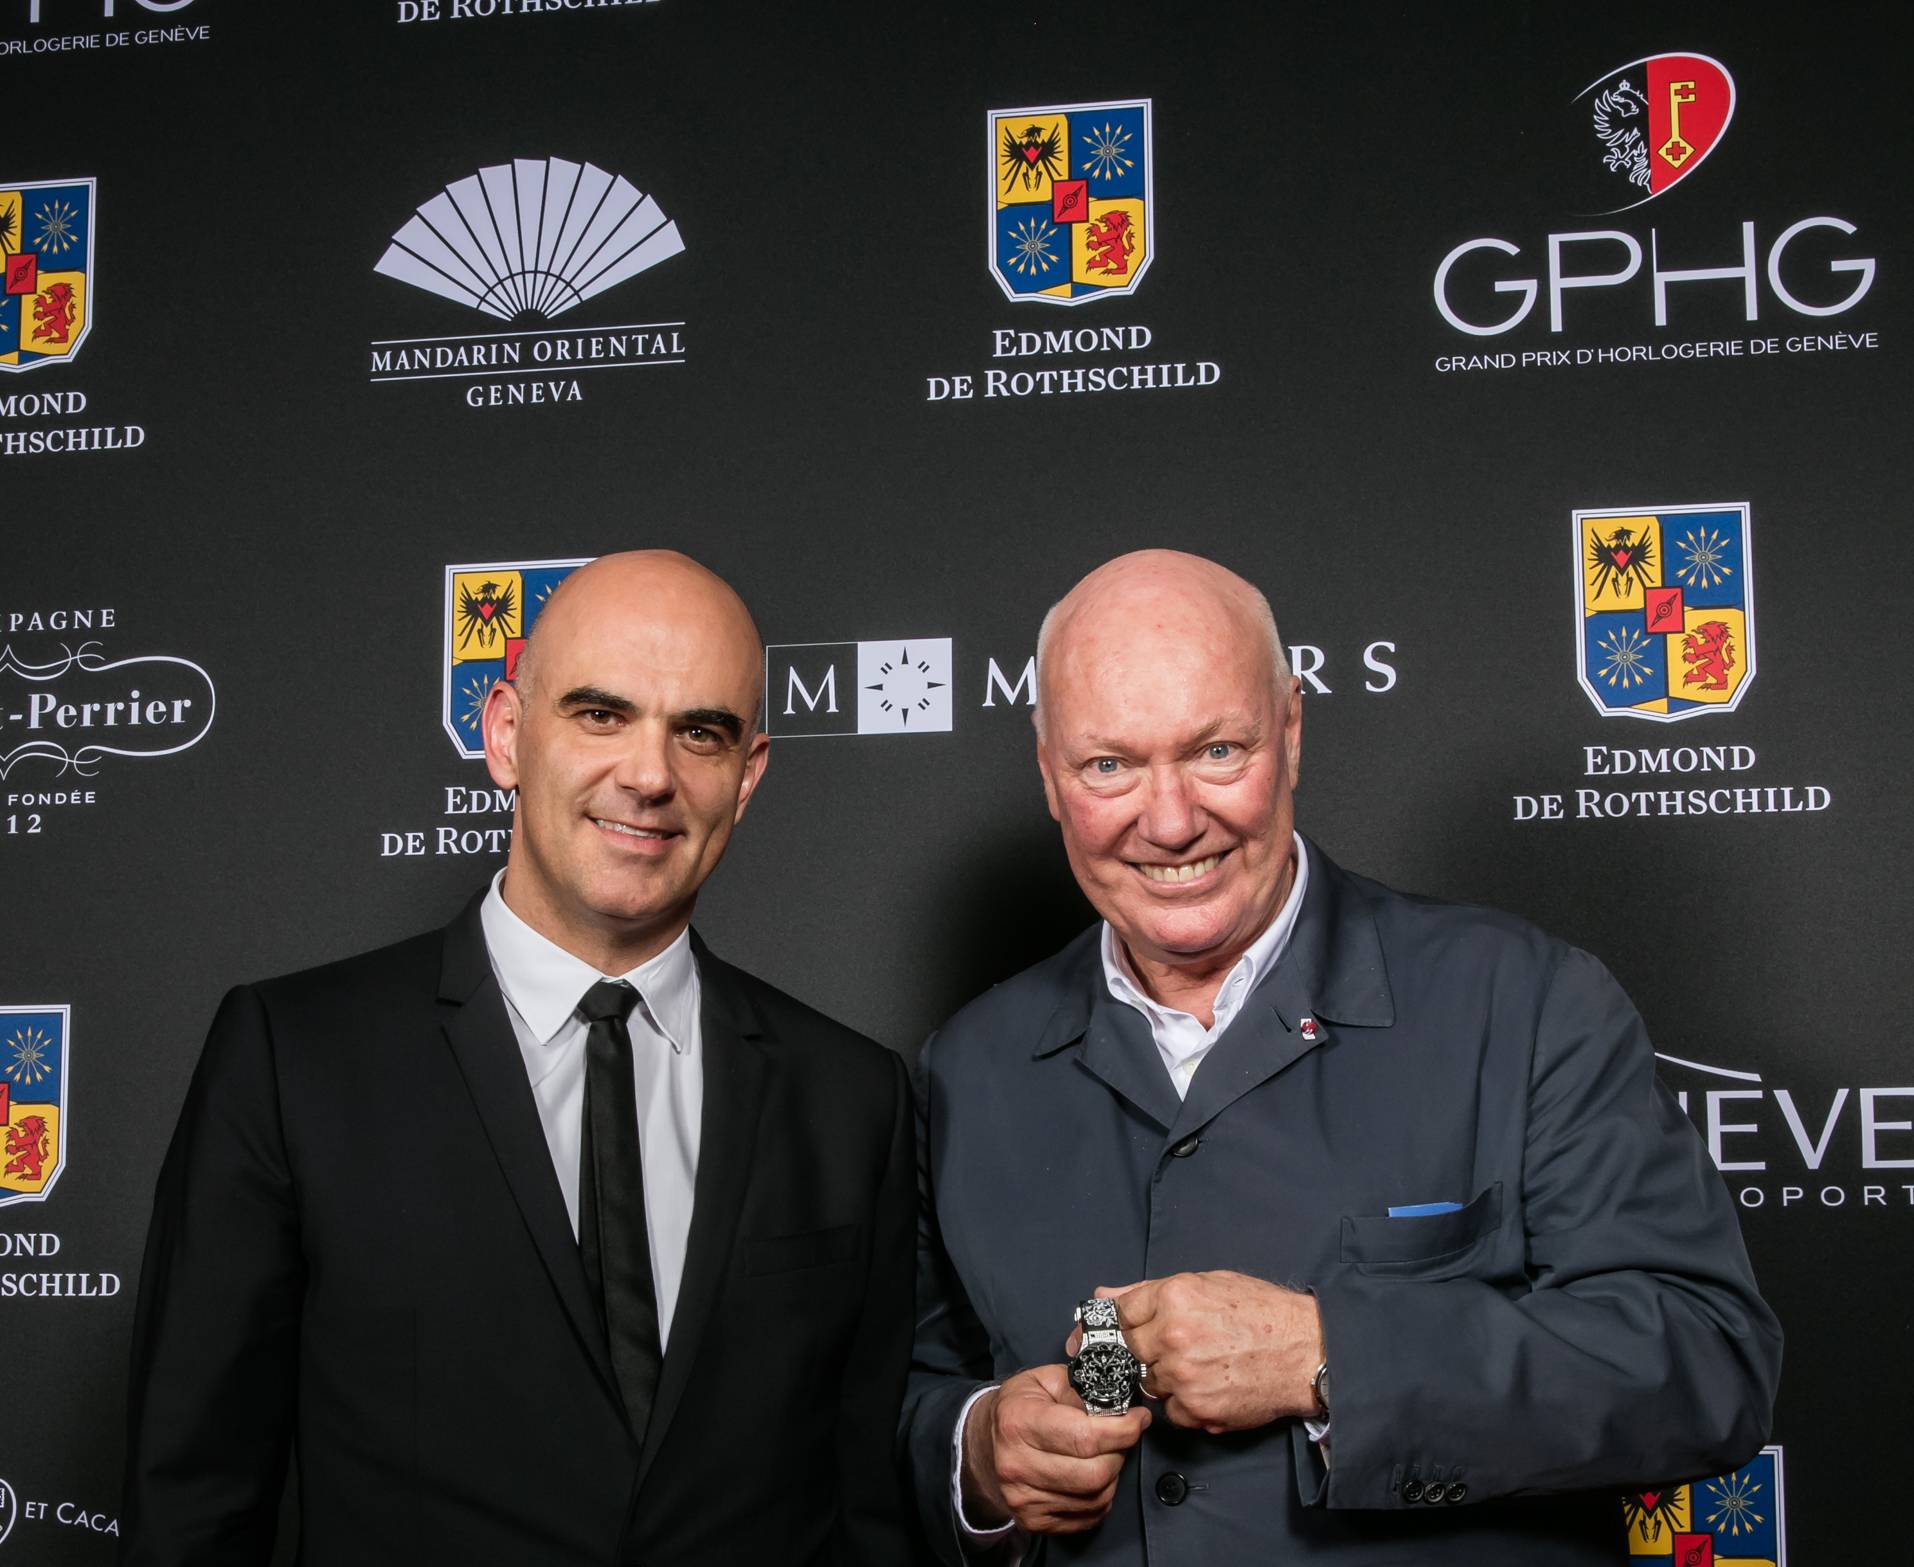 Alain Berset (Federal Councillor) and Jean-Claude Biver (President of the Watch Division of the LVMH Group and Chairman of Hublot, winner of the Ladies’ Watch Prize 2015)